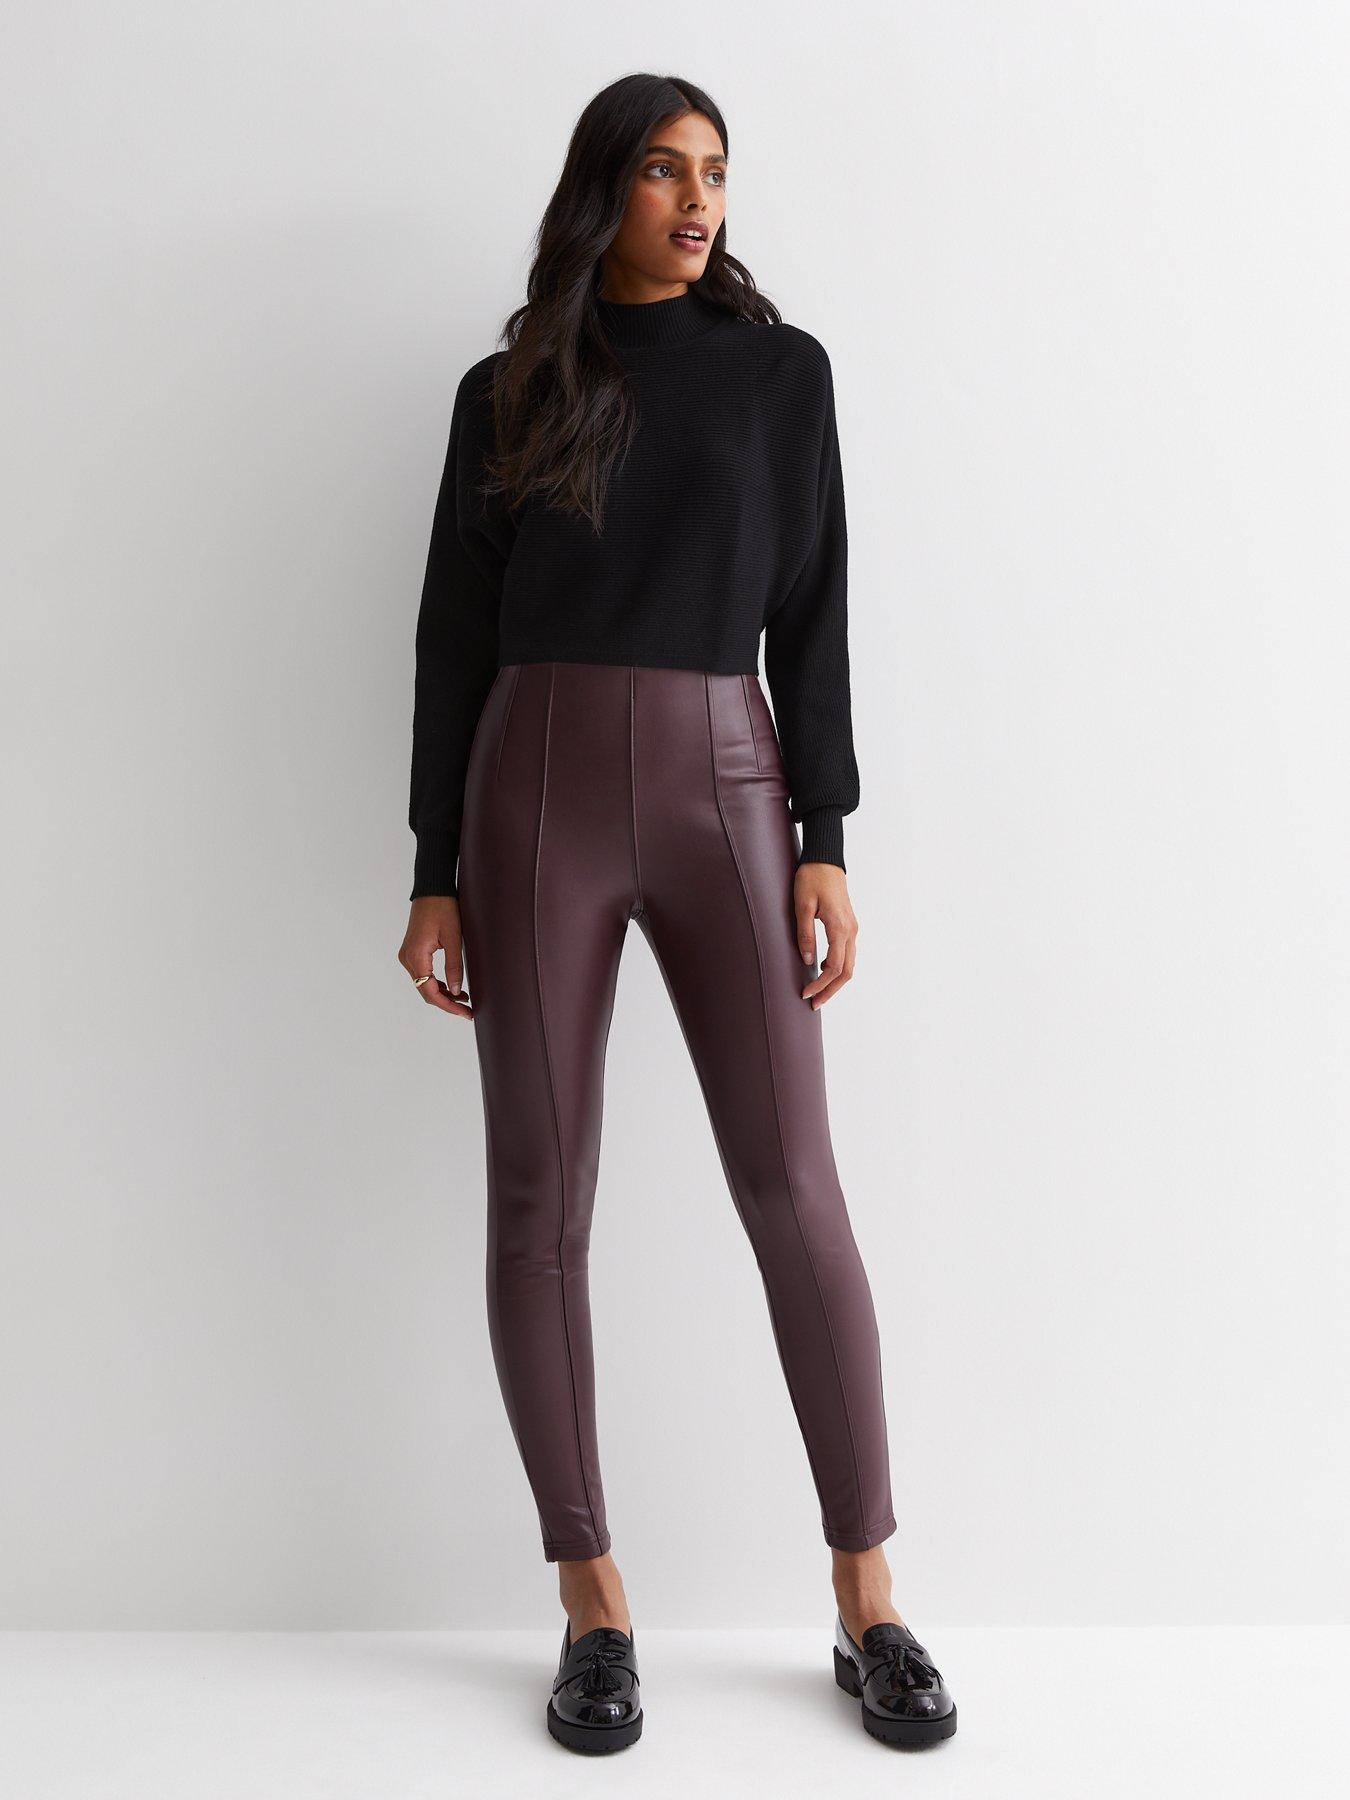 Buy Calzedonia Black Leather Effect Total Shaper Leggings from Next Ireland